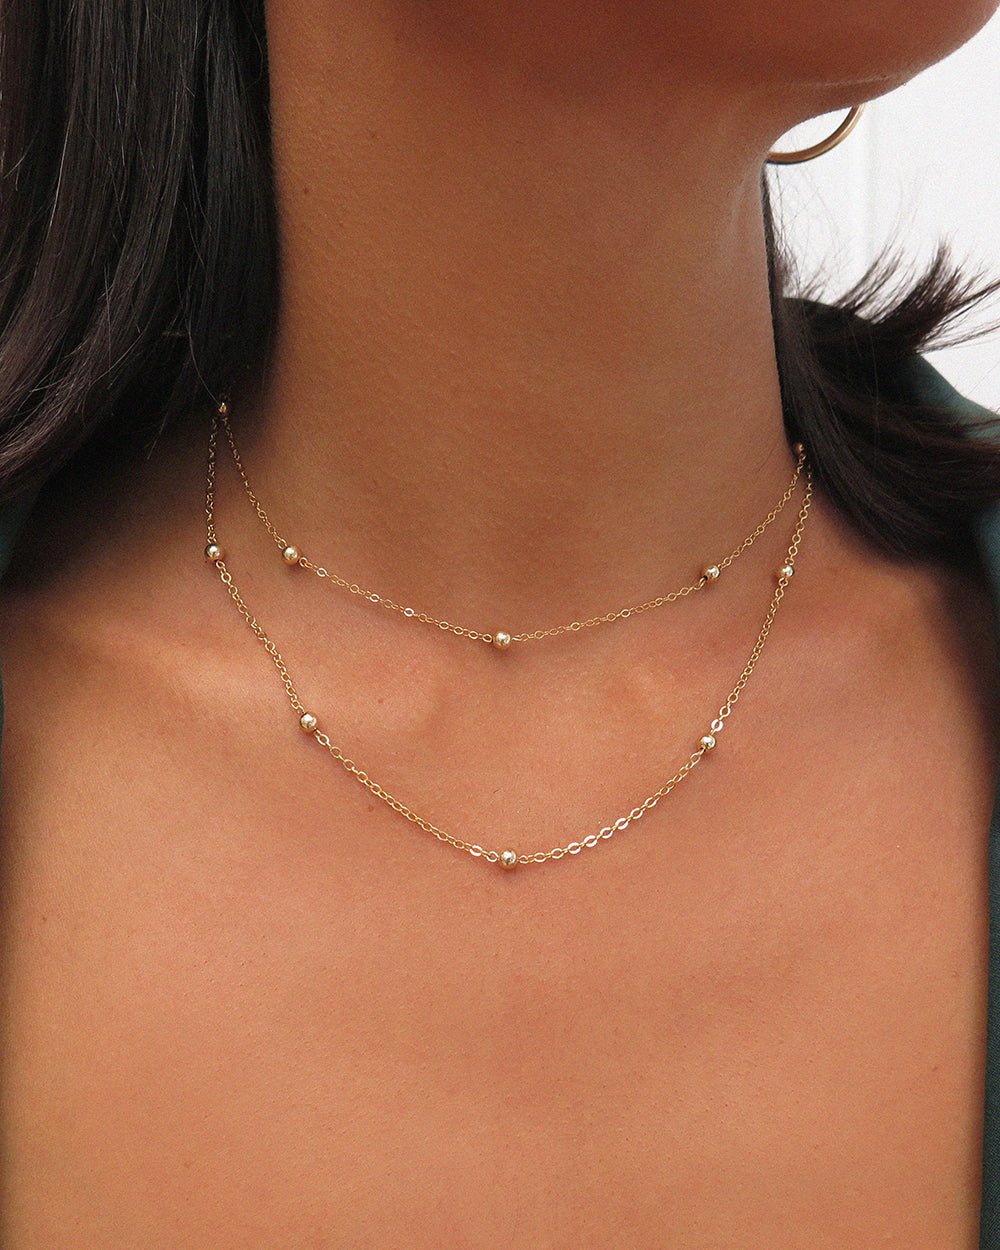 FIVE BEAD NECKLACE- 14k Gold Fill - The Littl - 14k Yellow Gold Fill - 37cm (choker) Necklaces